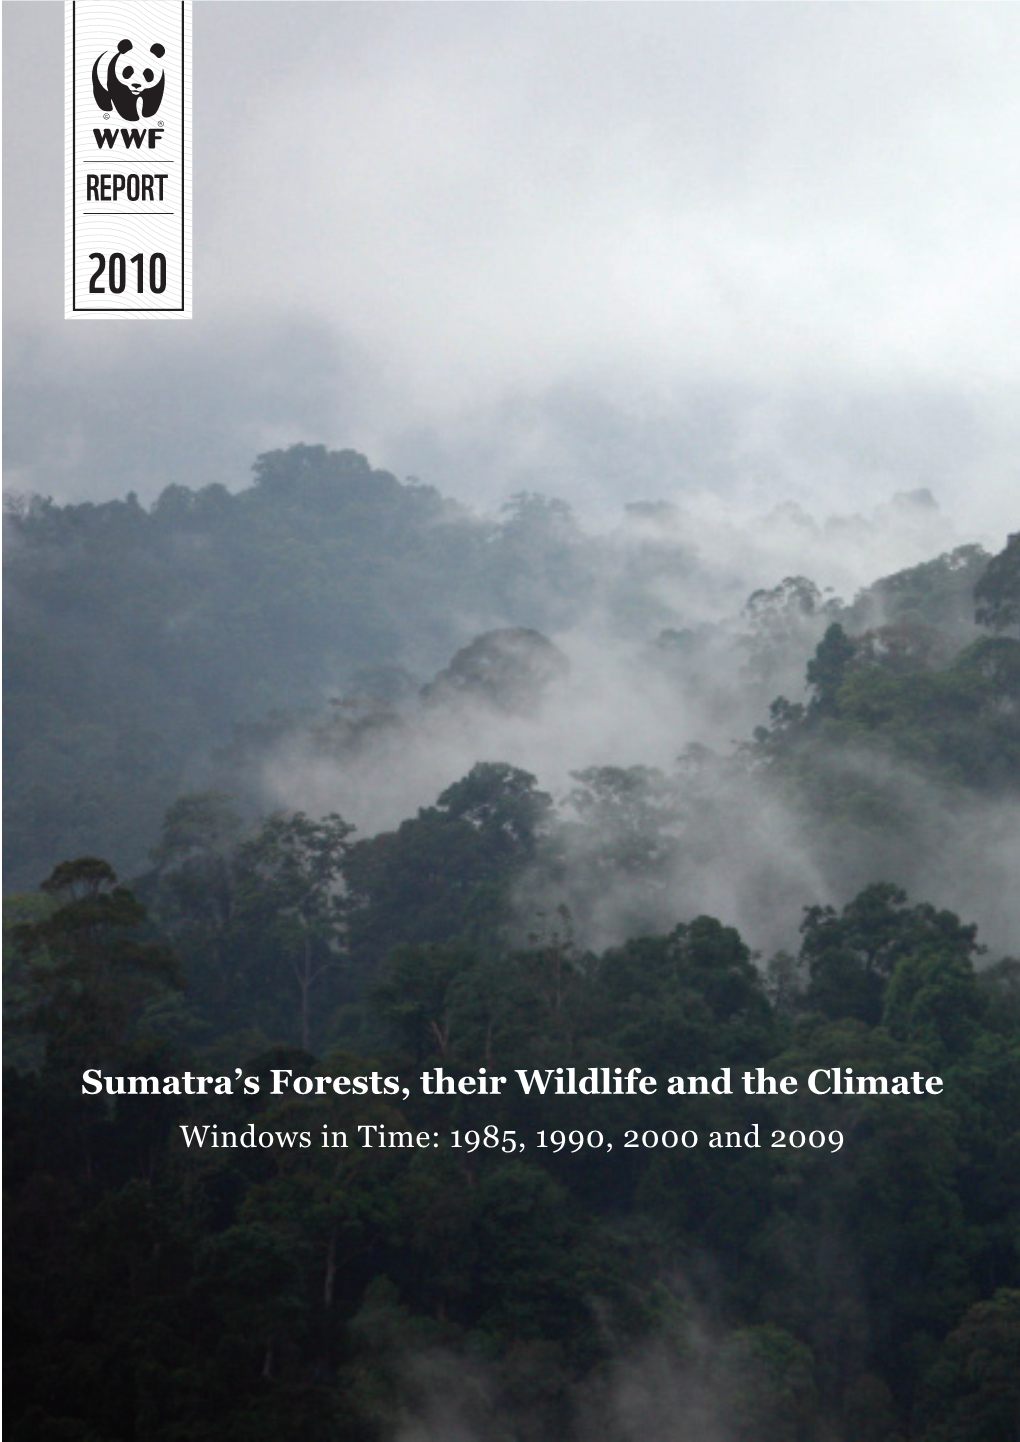 Sumatra's Forests, Their Wildlife and the Climate